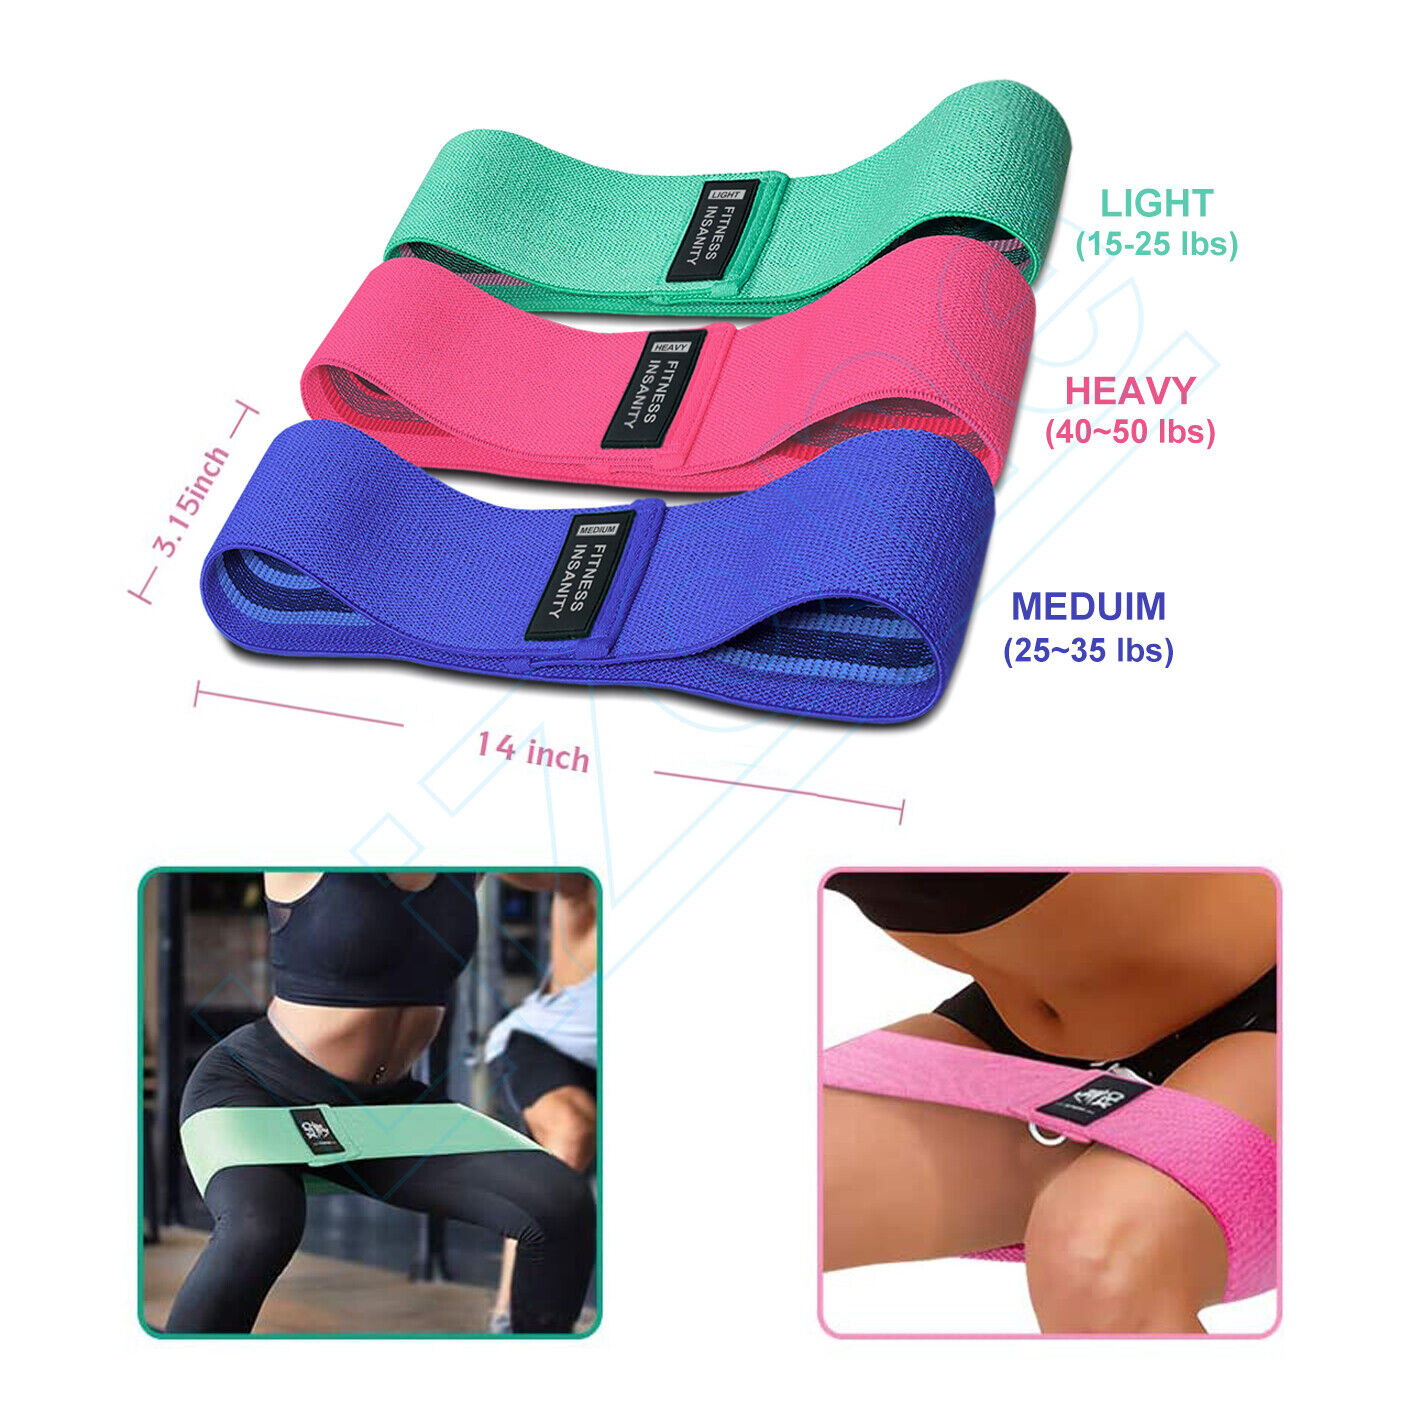 3 Pcs Exercise Workout Gym Fitness Fabric Cloth Resistance Booty Bands Loop Set Lizone 3PRBS - фотография #2